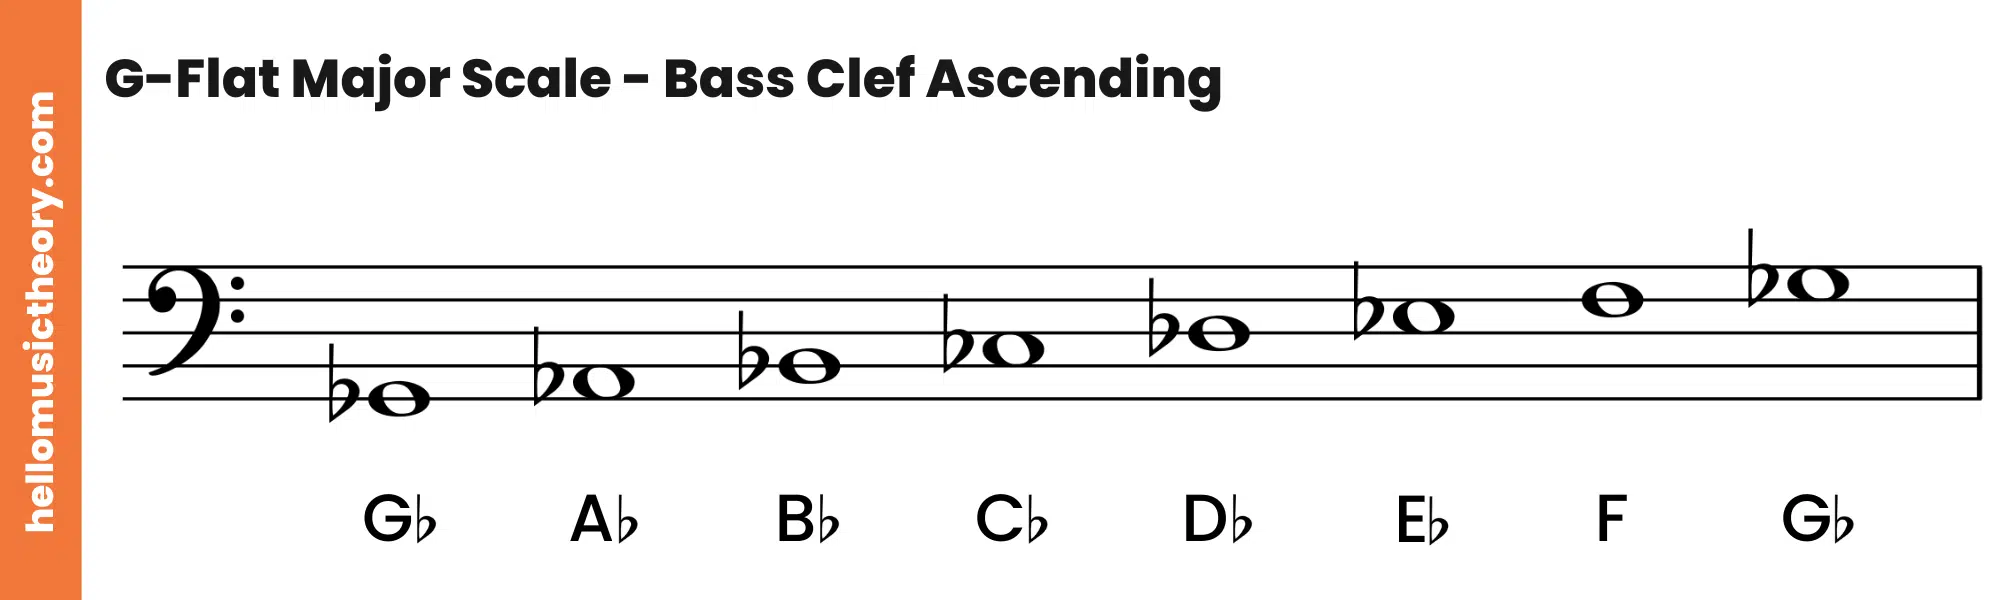 G-Flat Major Scale Bass Clef Ascending